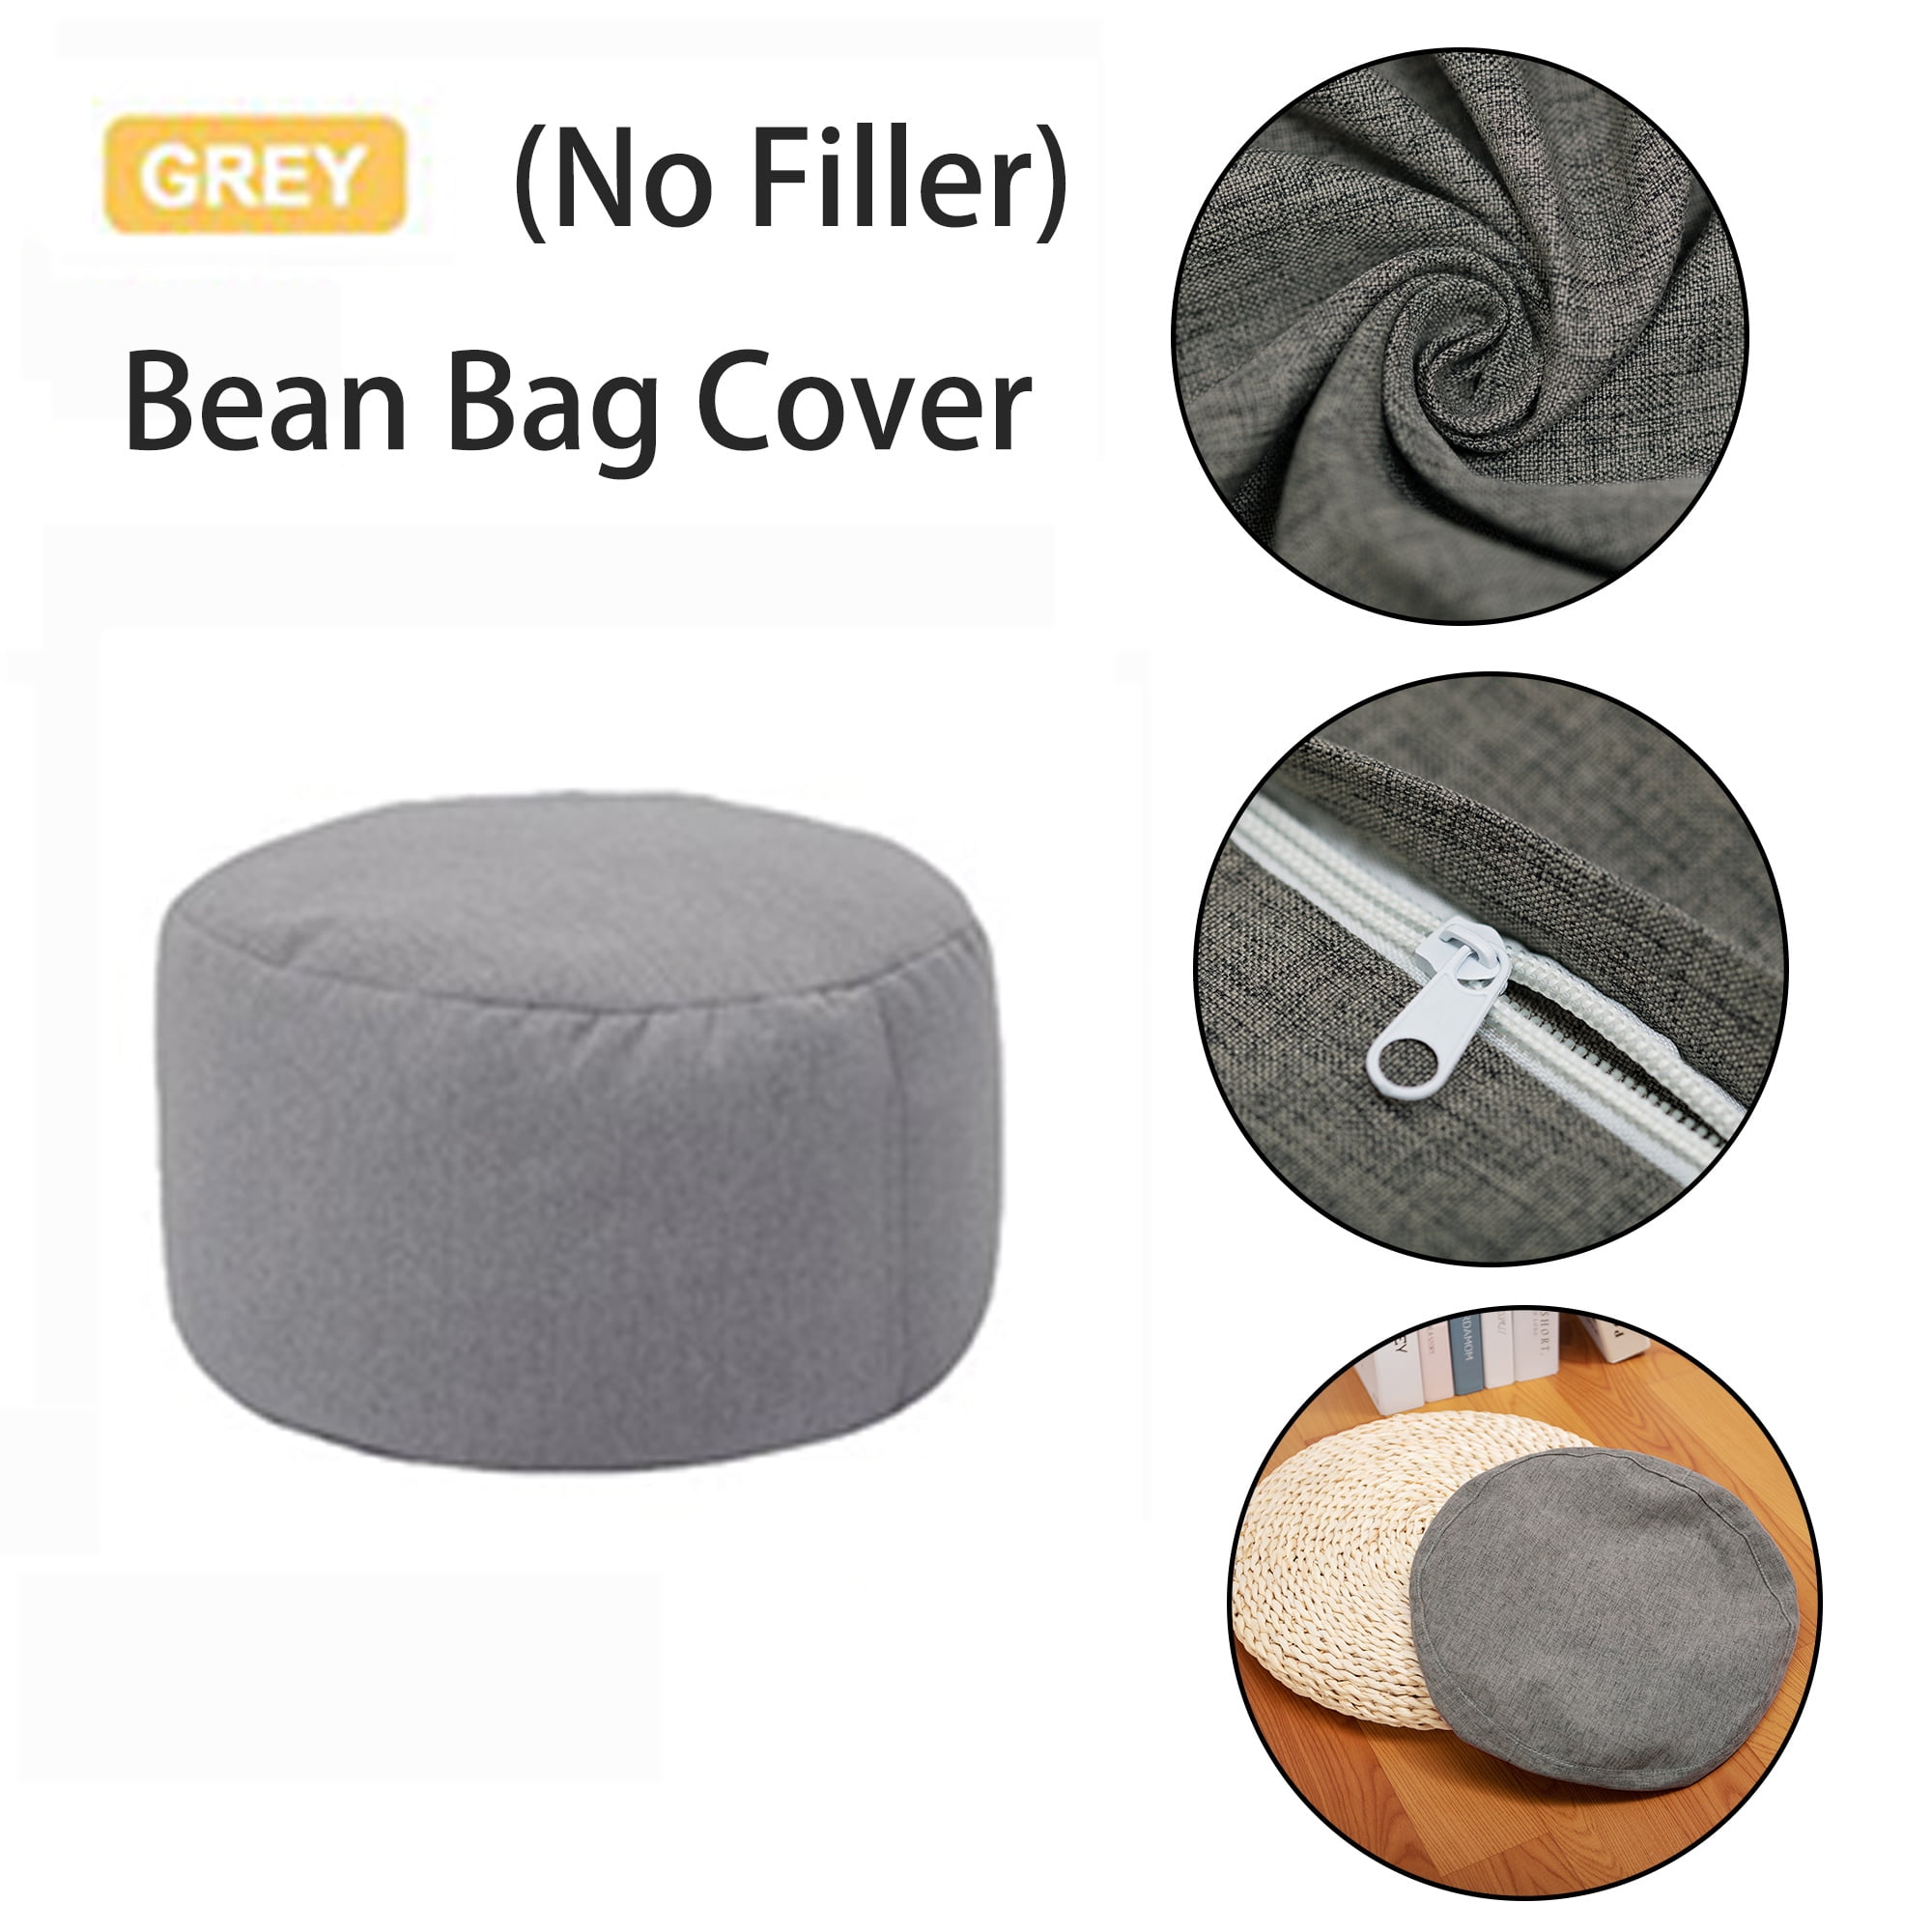 2019 Fabric Ottoman Footstool Foot Stool Rest Pouffe Seat Bean Bag Cover    @ 